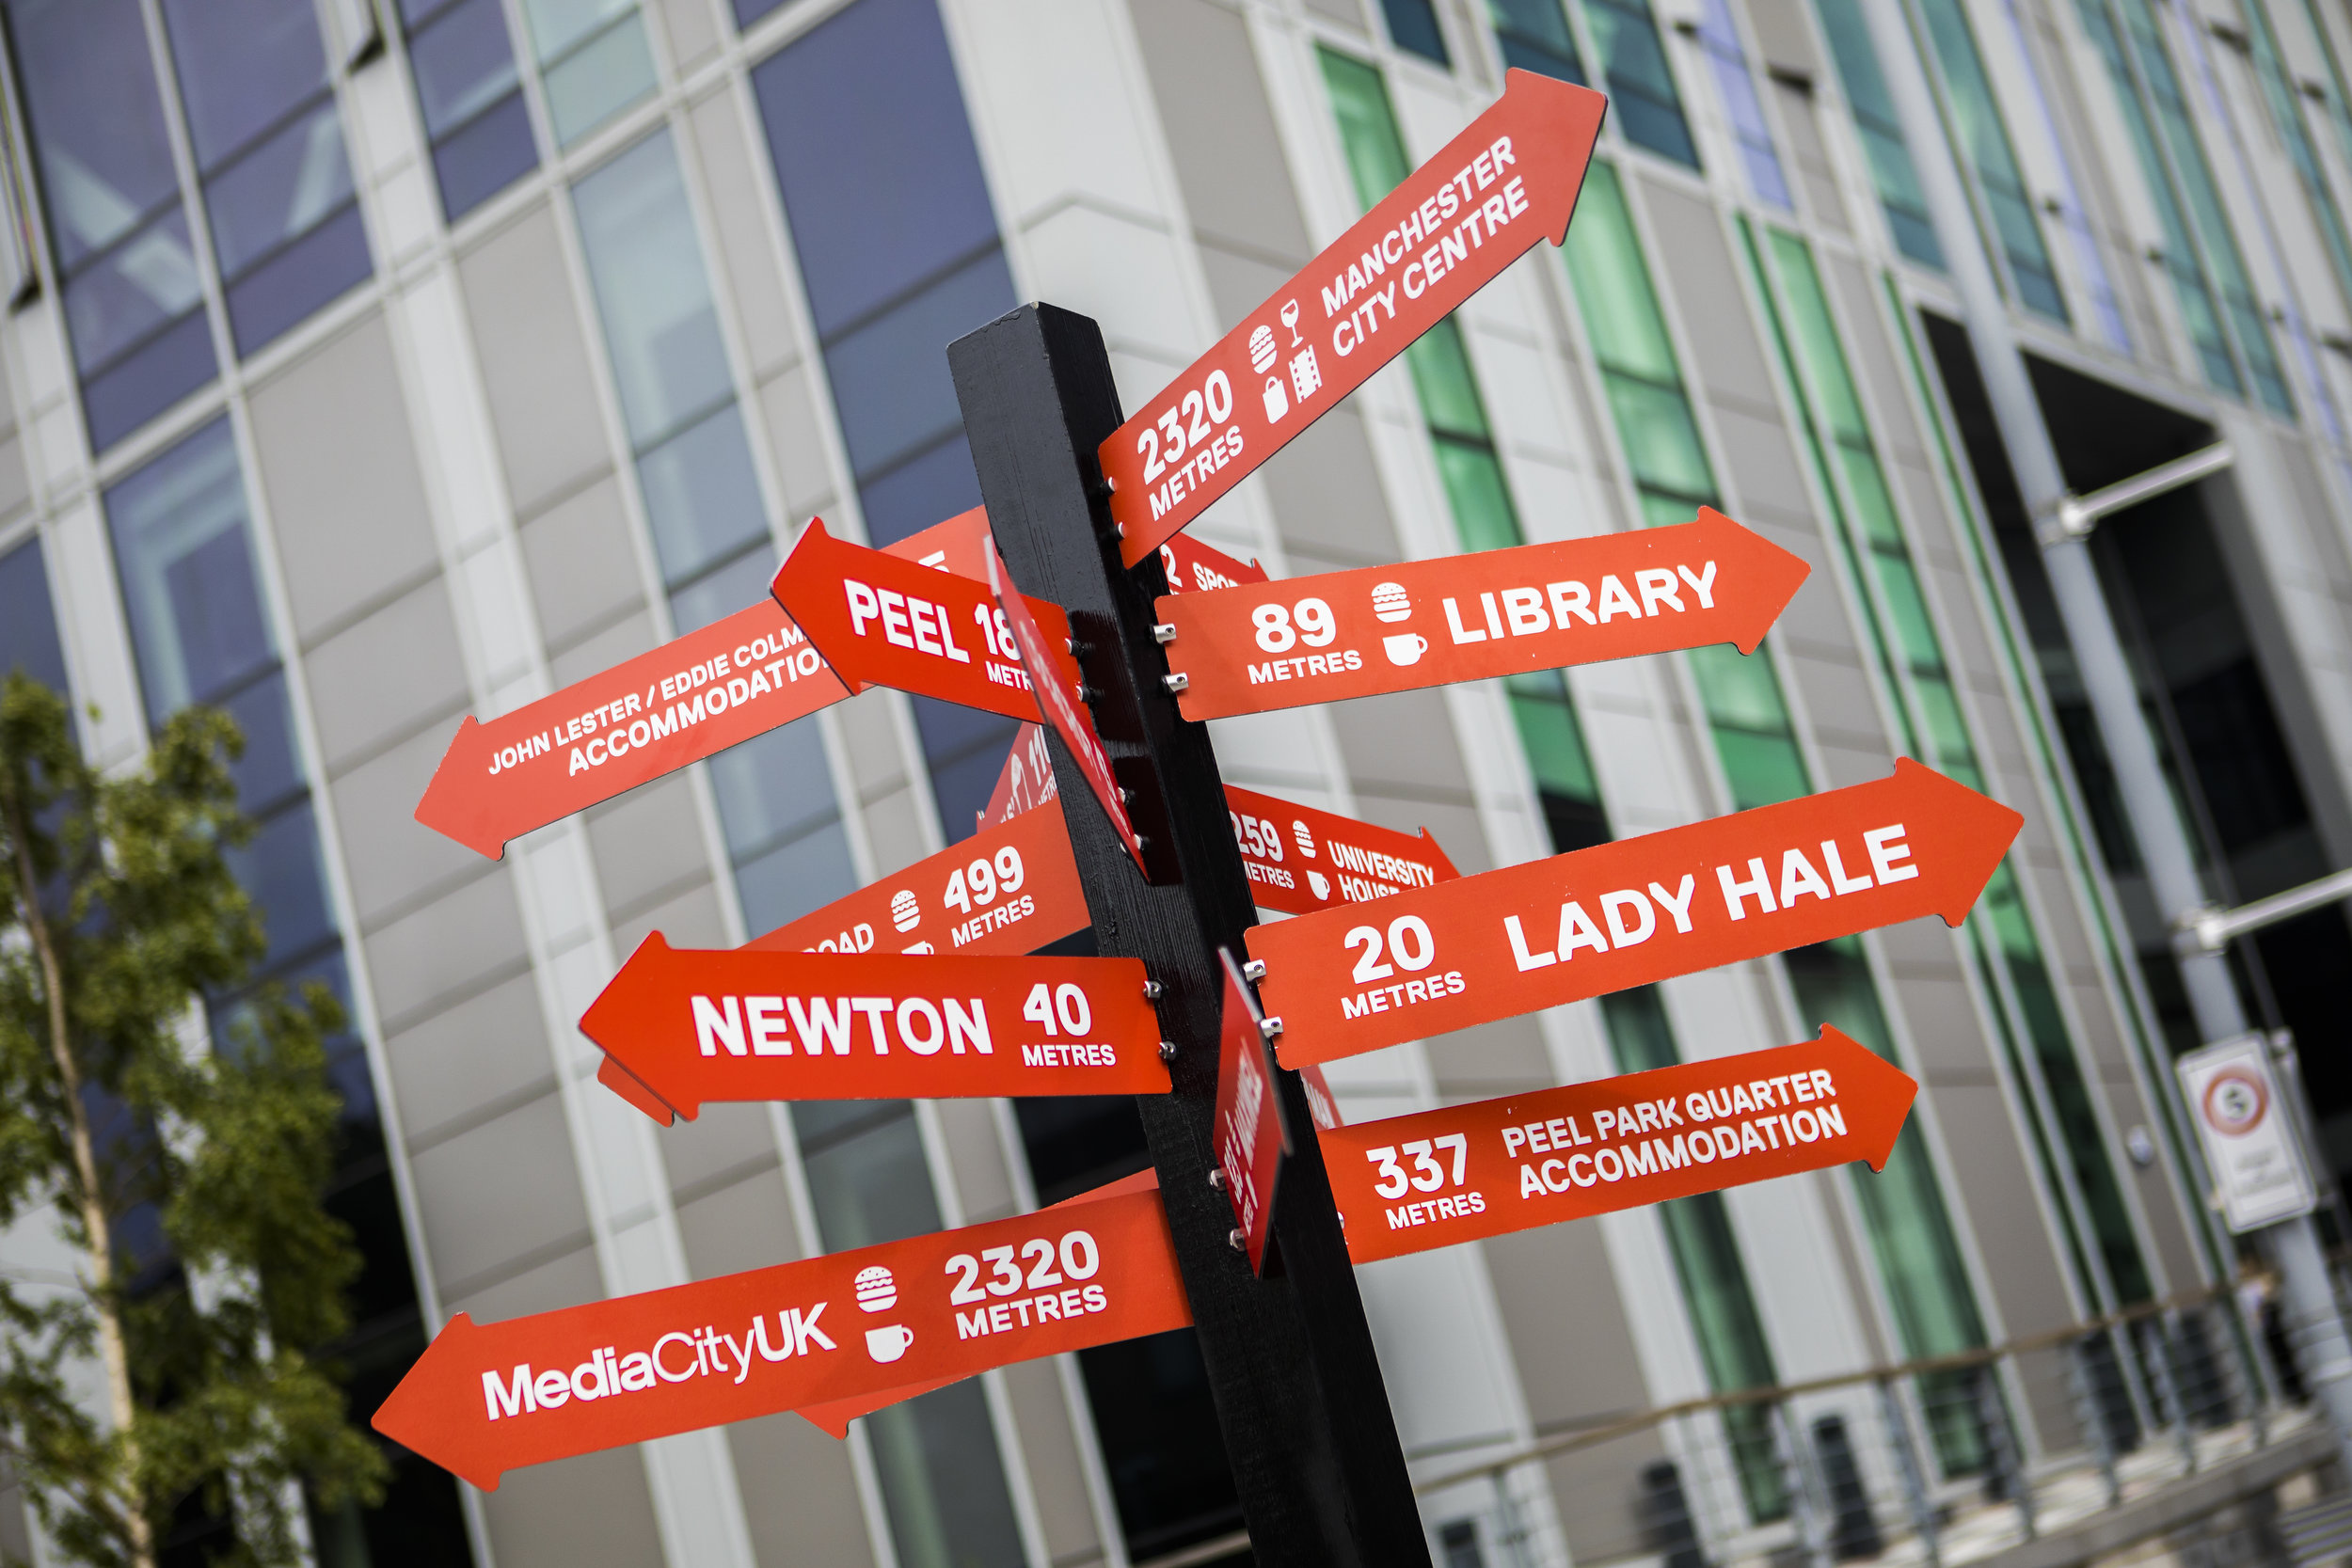 University of Salford Open day signpost.